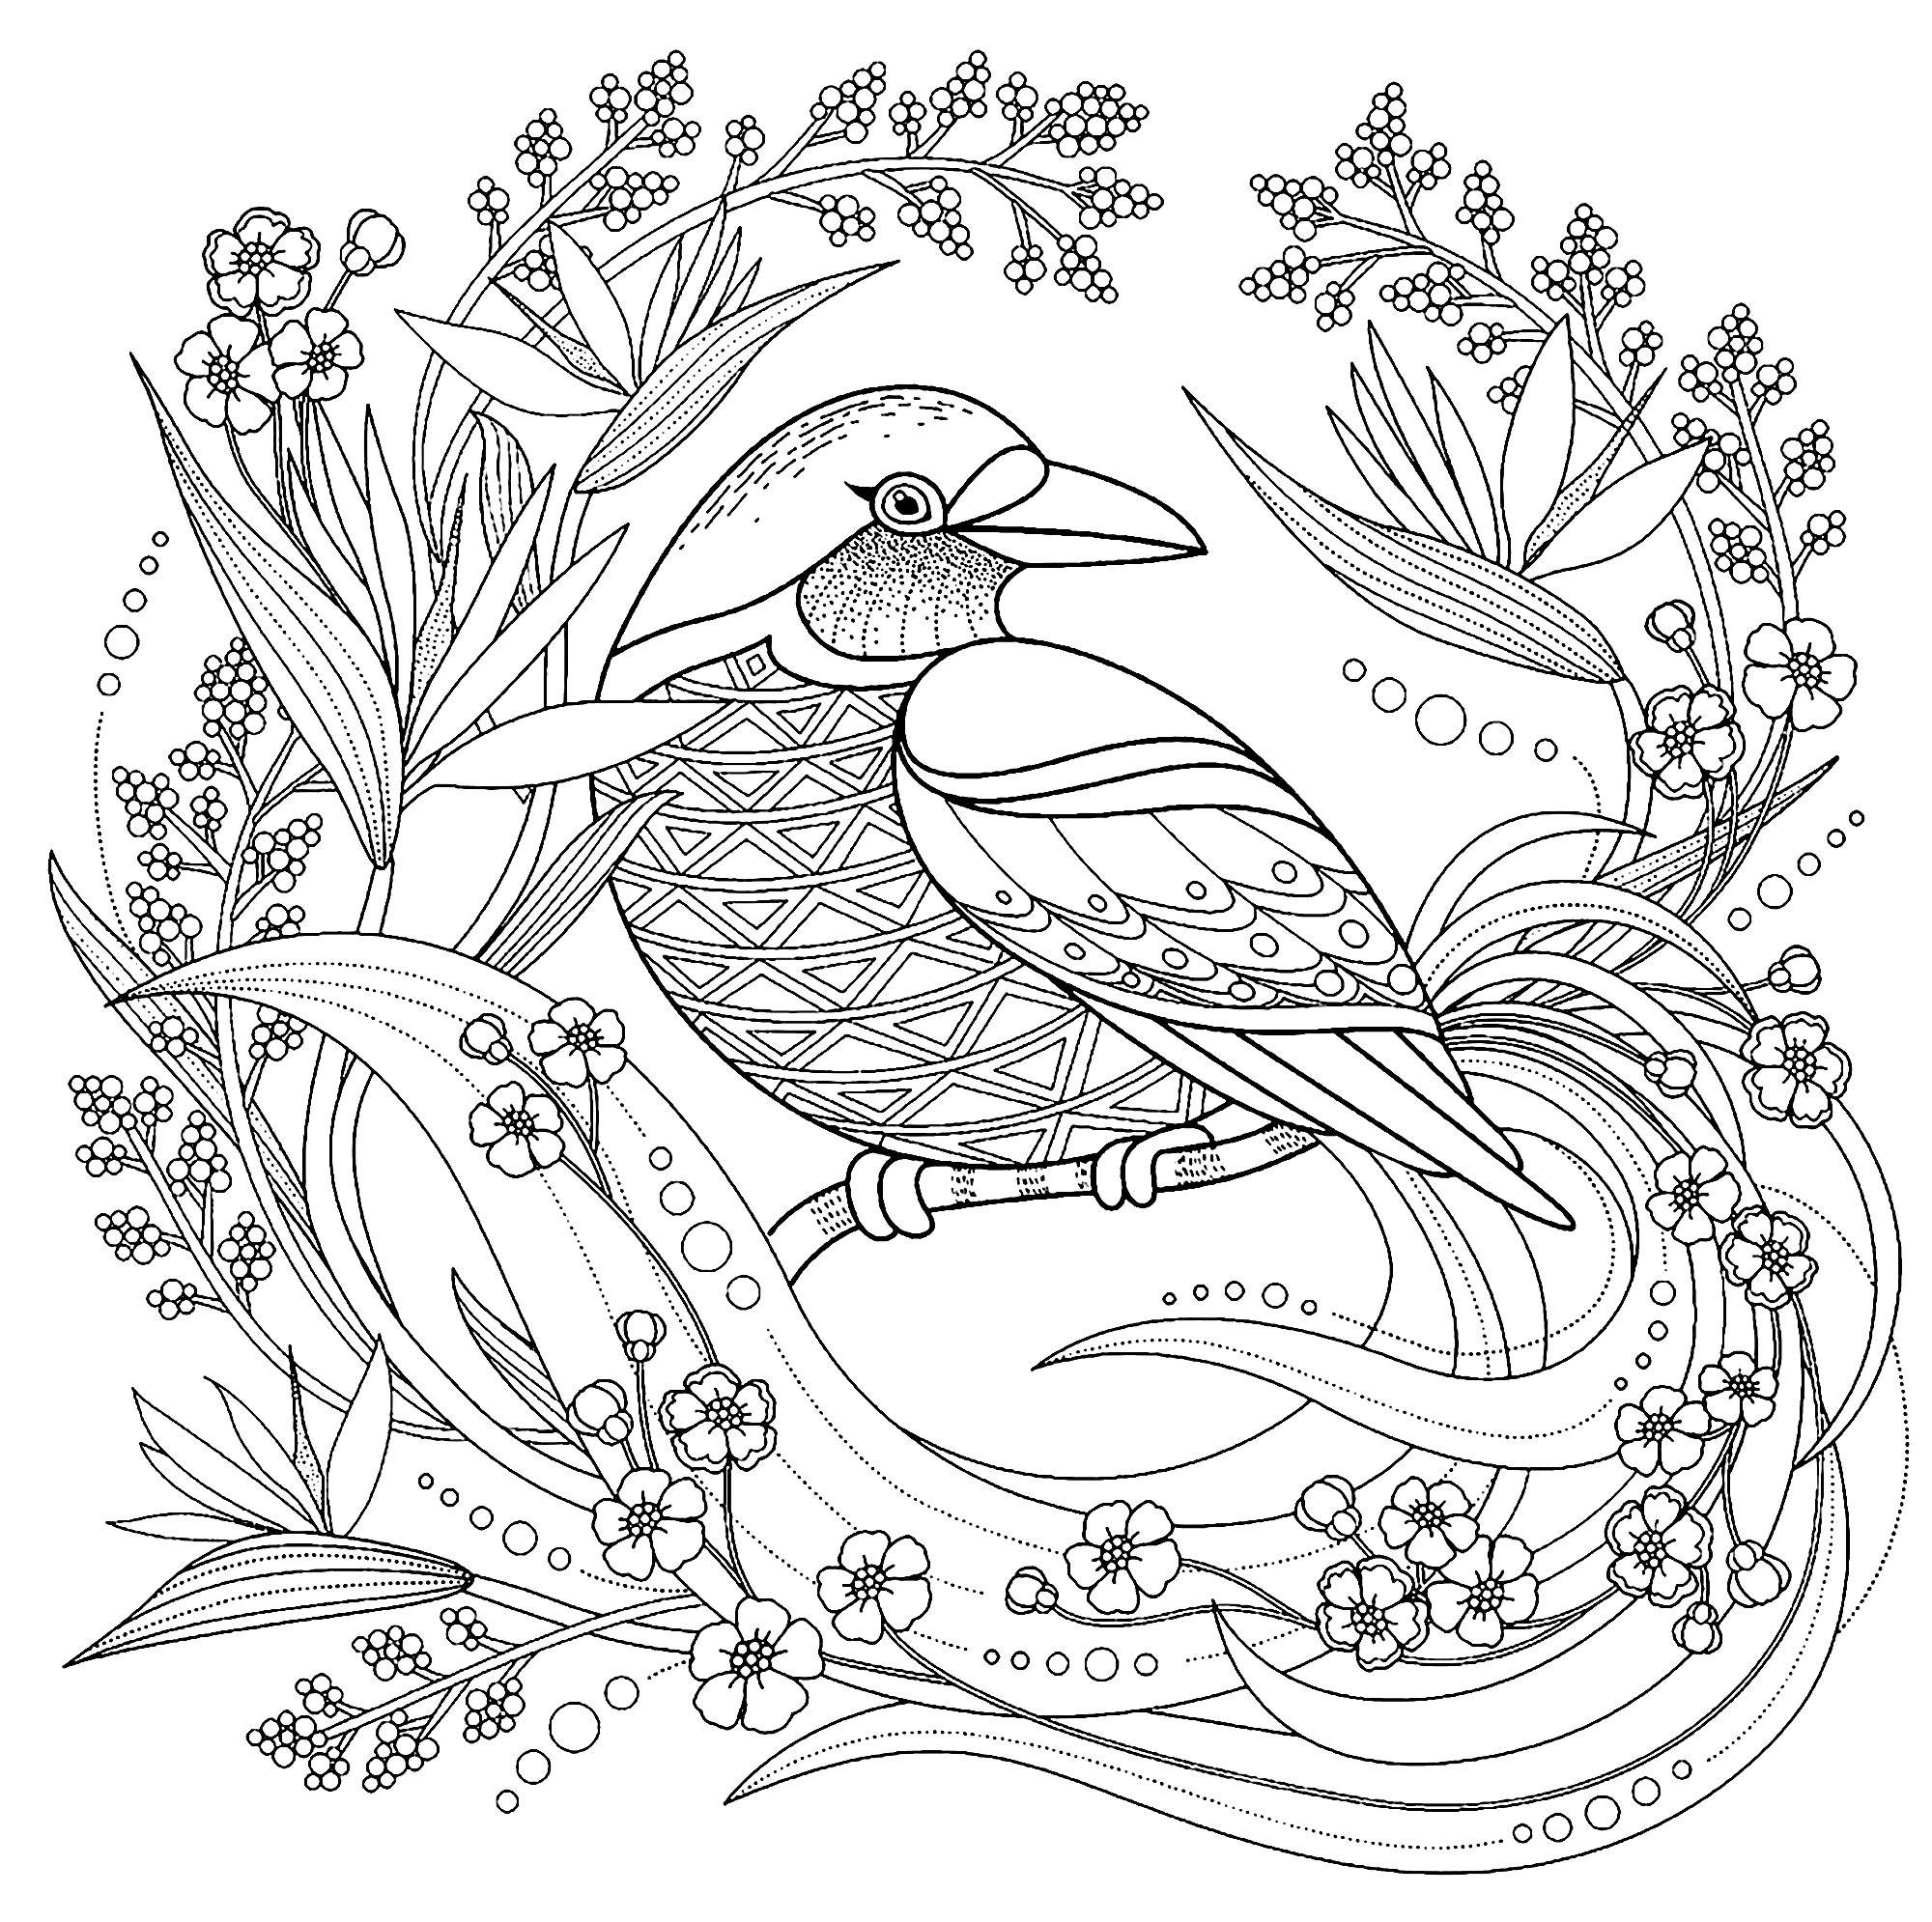 Simple Birds coloring page for kids